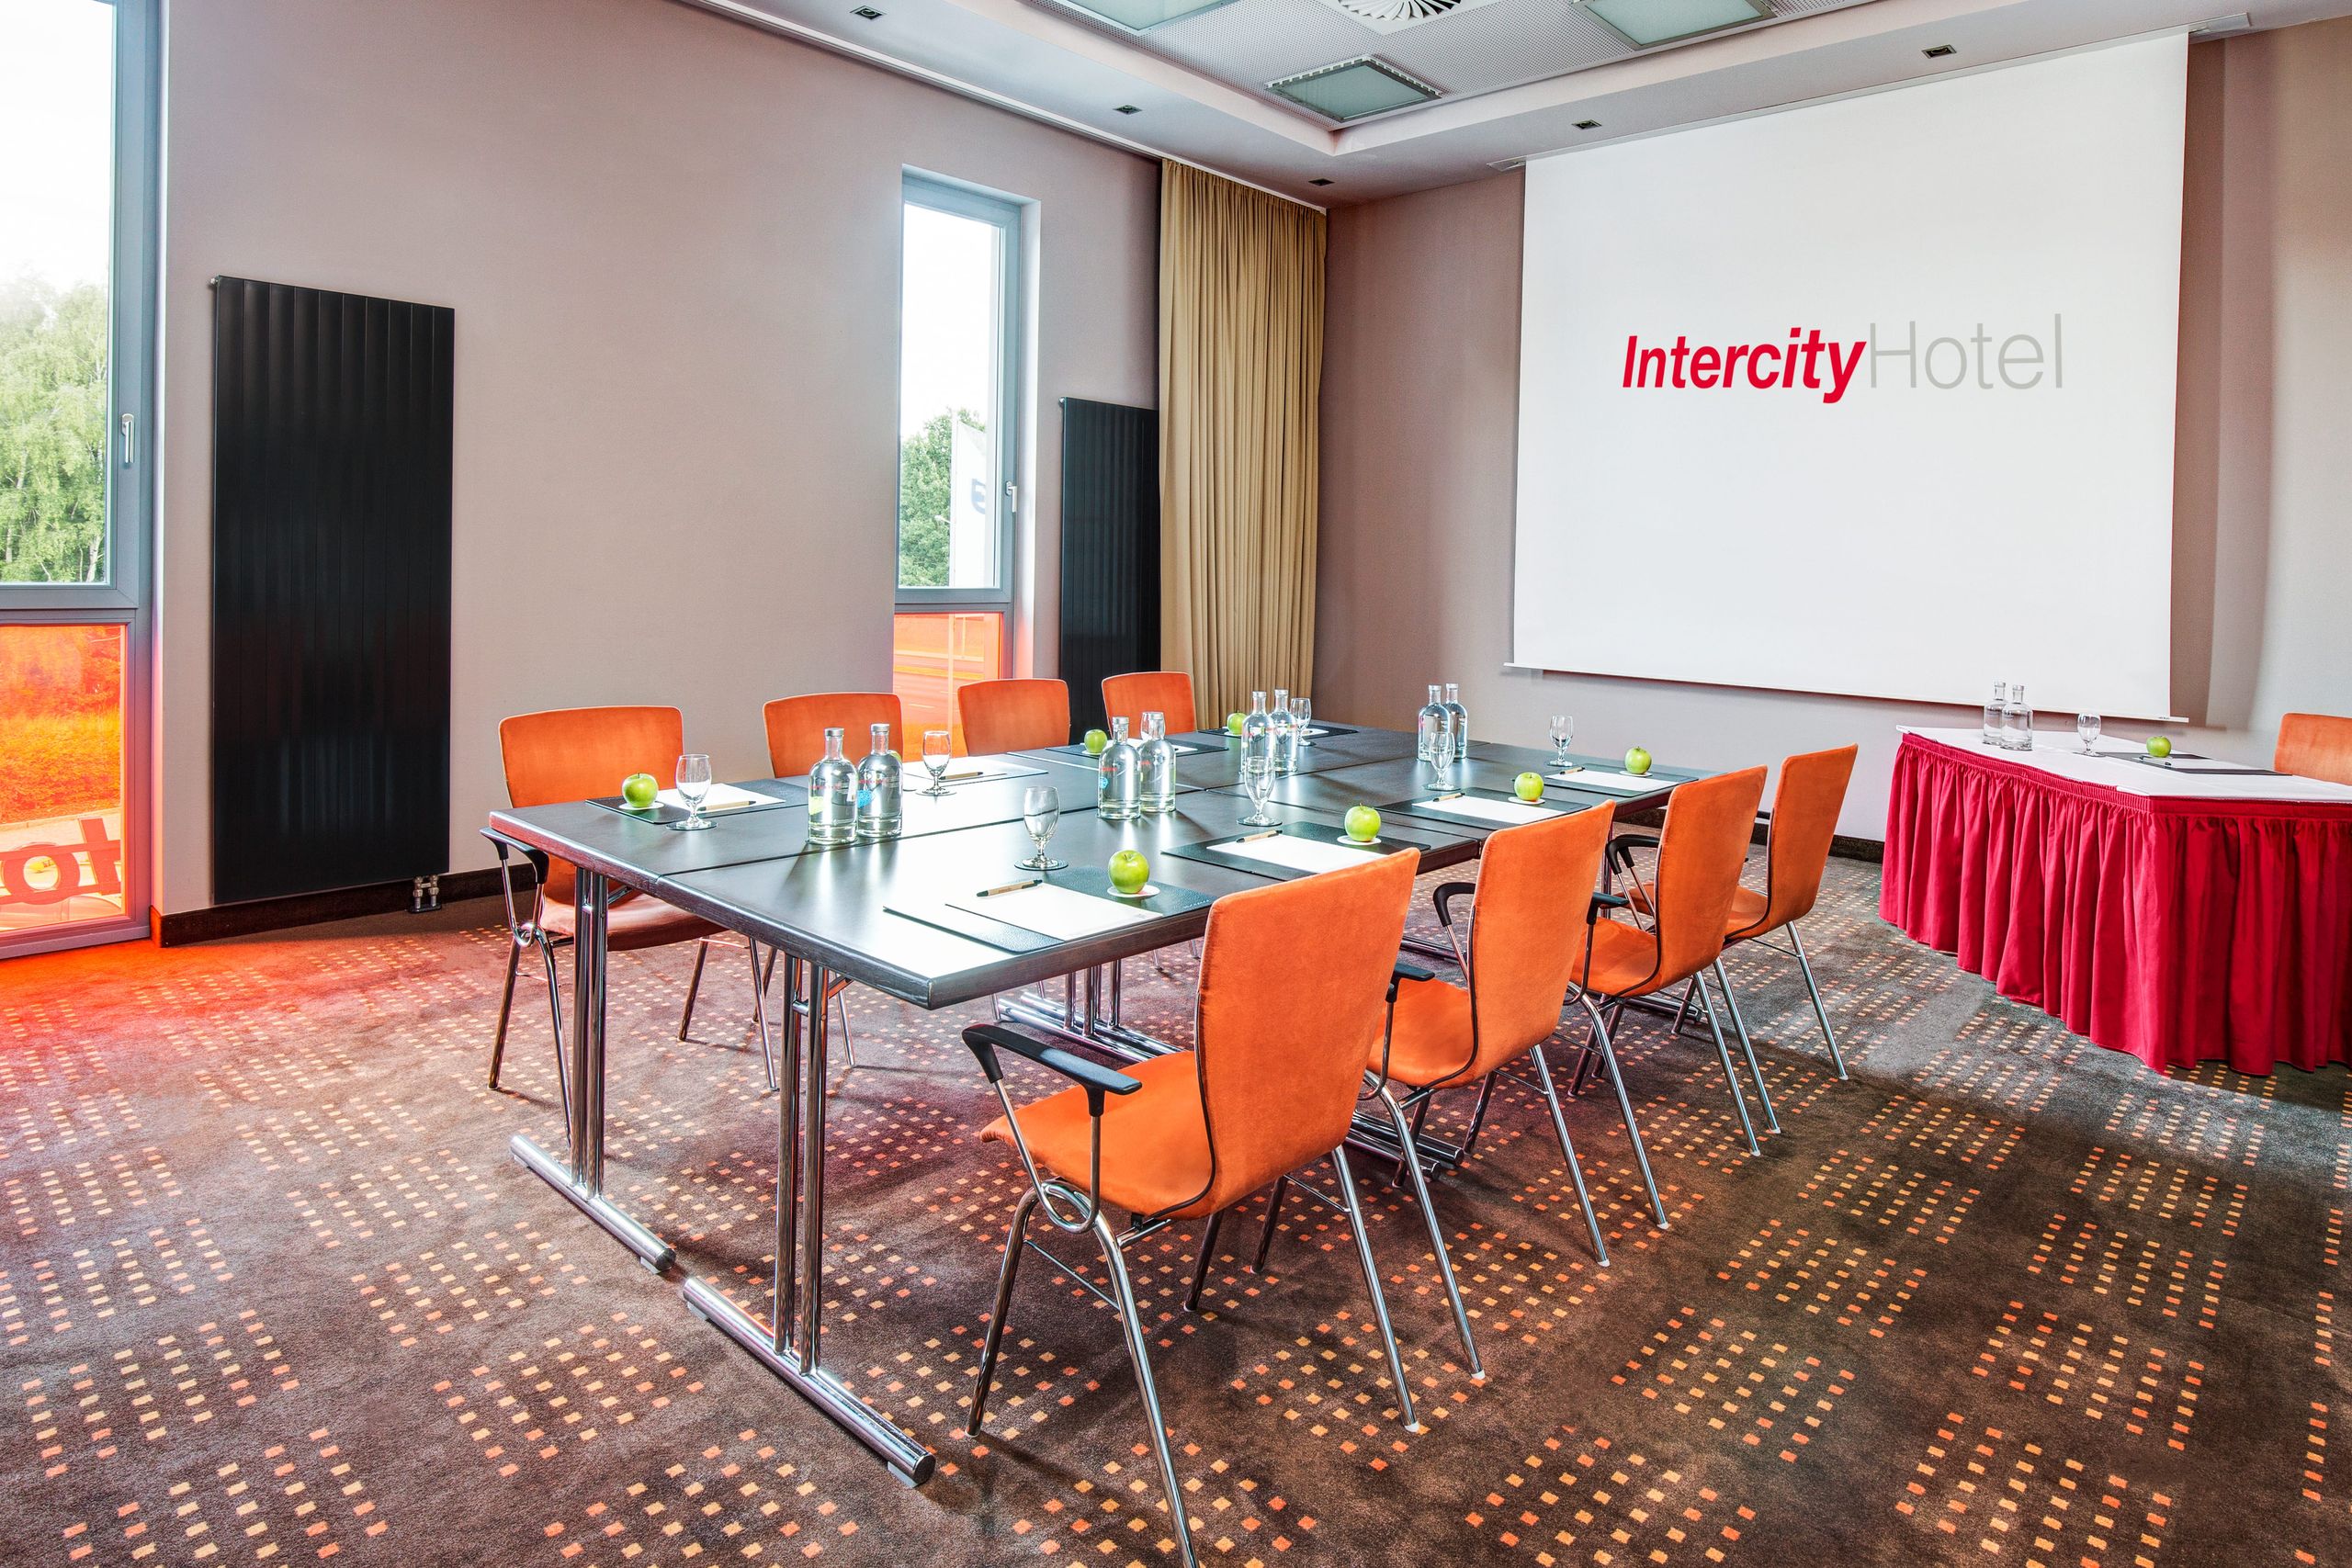 IntercityHotel Berlin Airport Area North - Meetings & Events - Conference room 